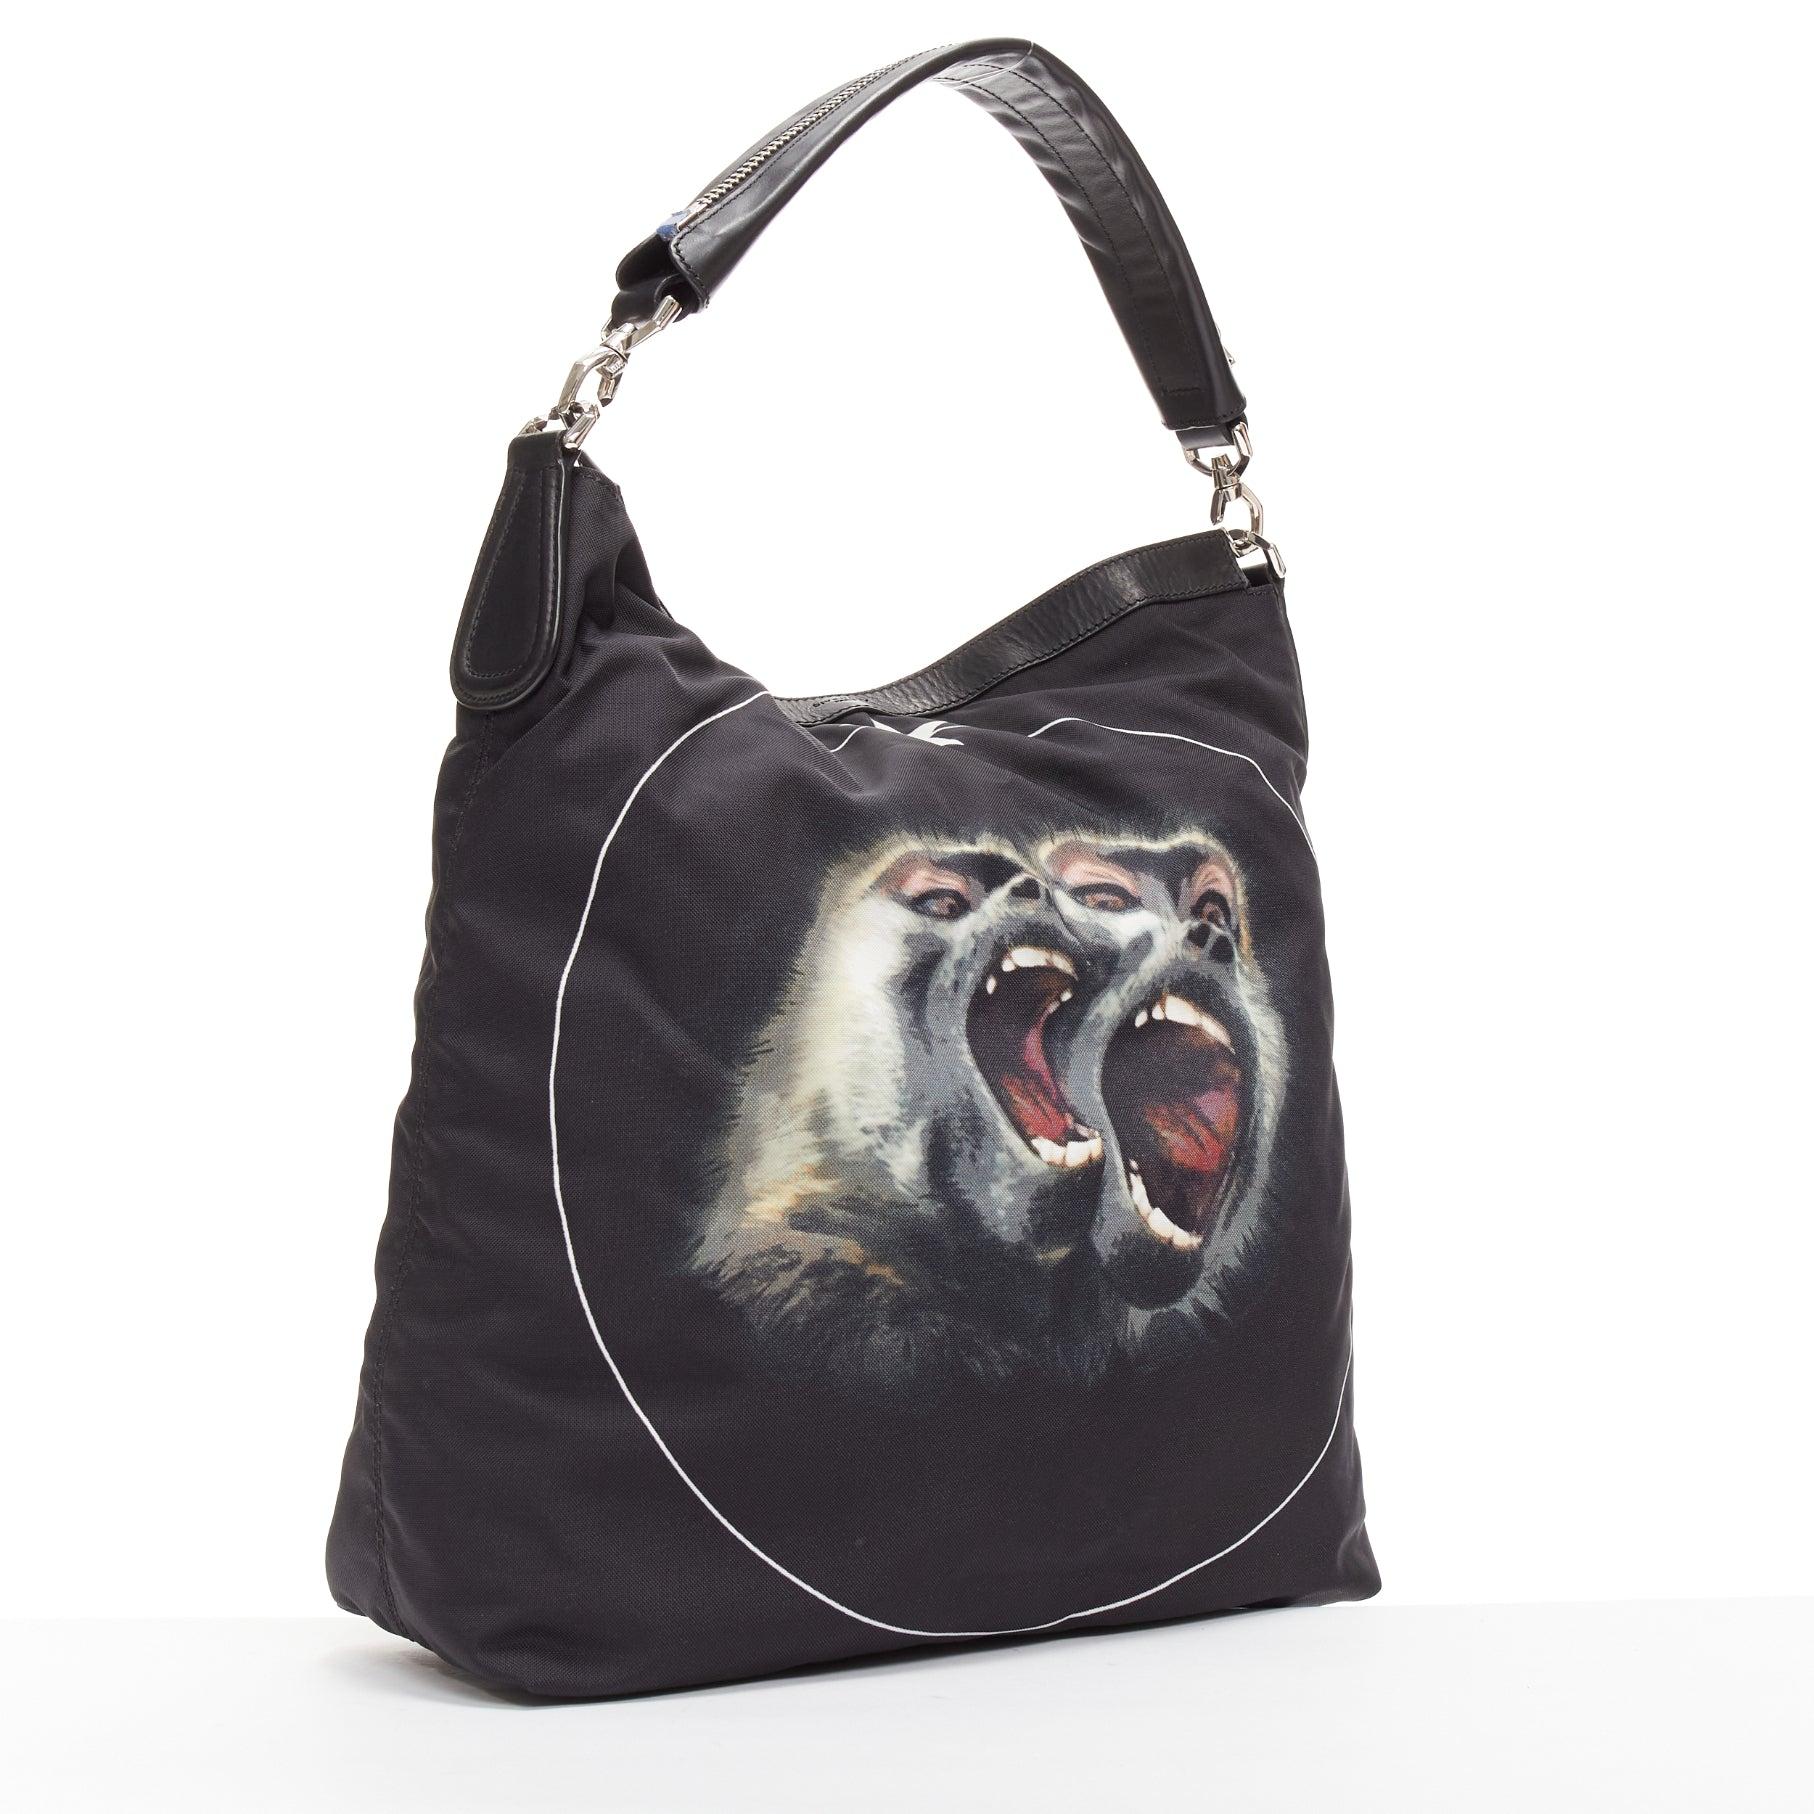 GIVENCHY Riccardo Tisci Monkey Brothers Nightingale nylon leather shoulder bag In Good Condition For Sale In Hong Kong, NT